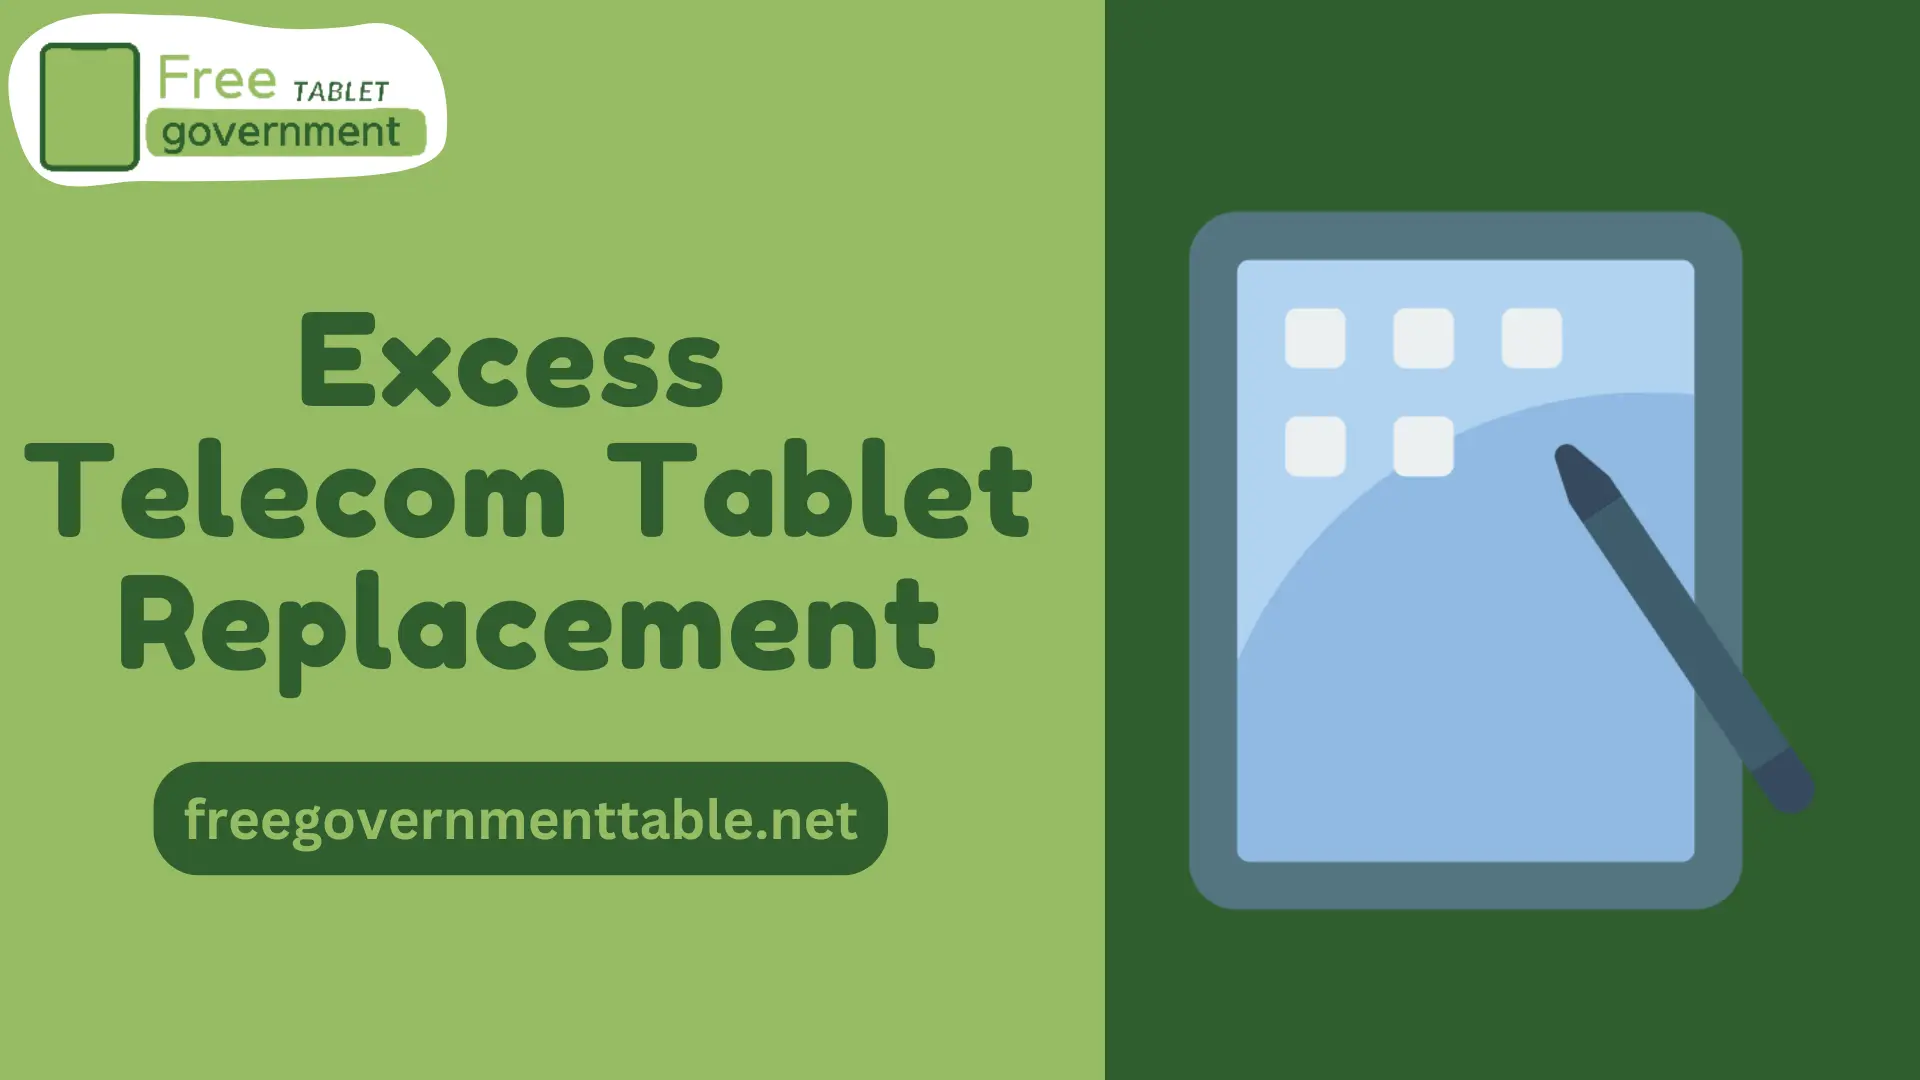 Excess Telecom Tablet Replacement